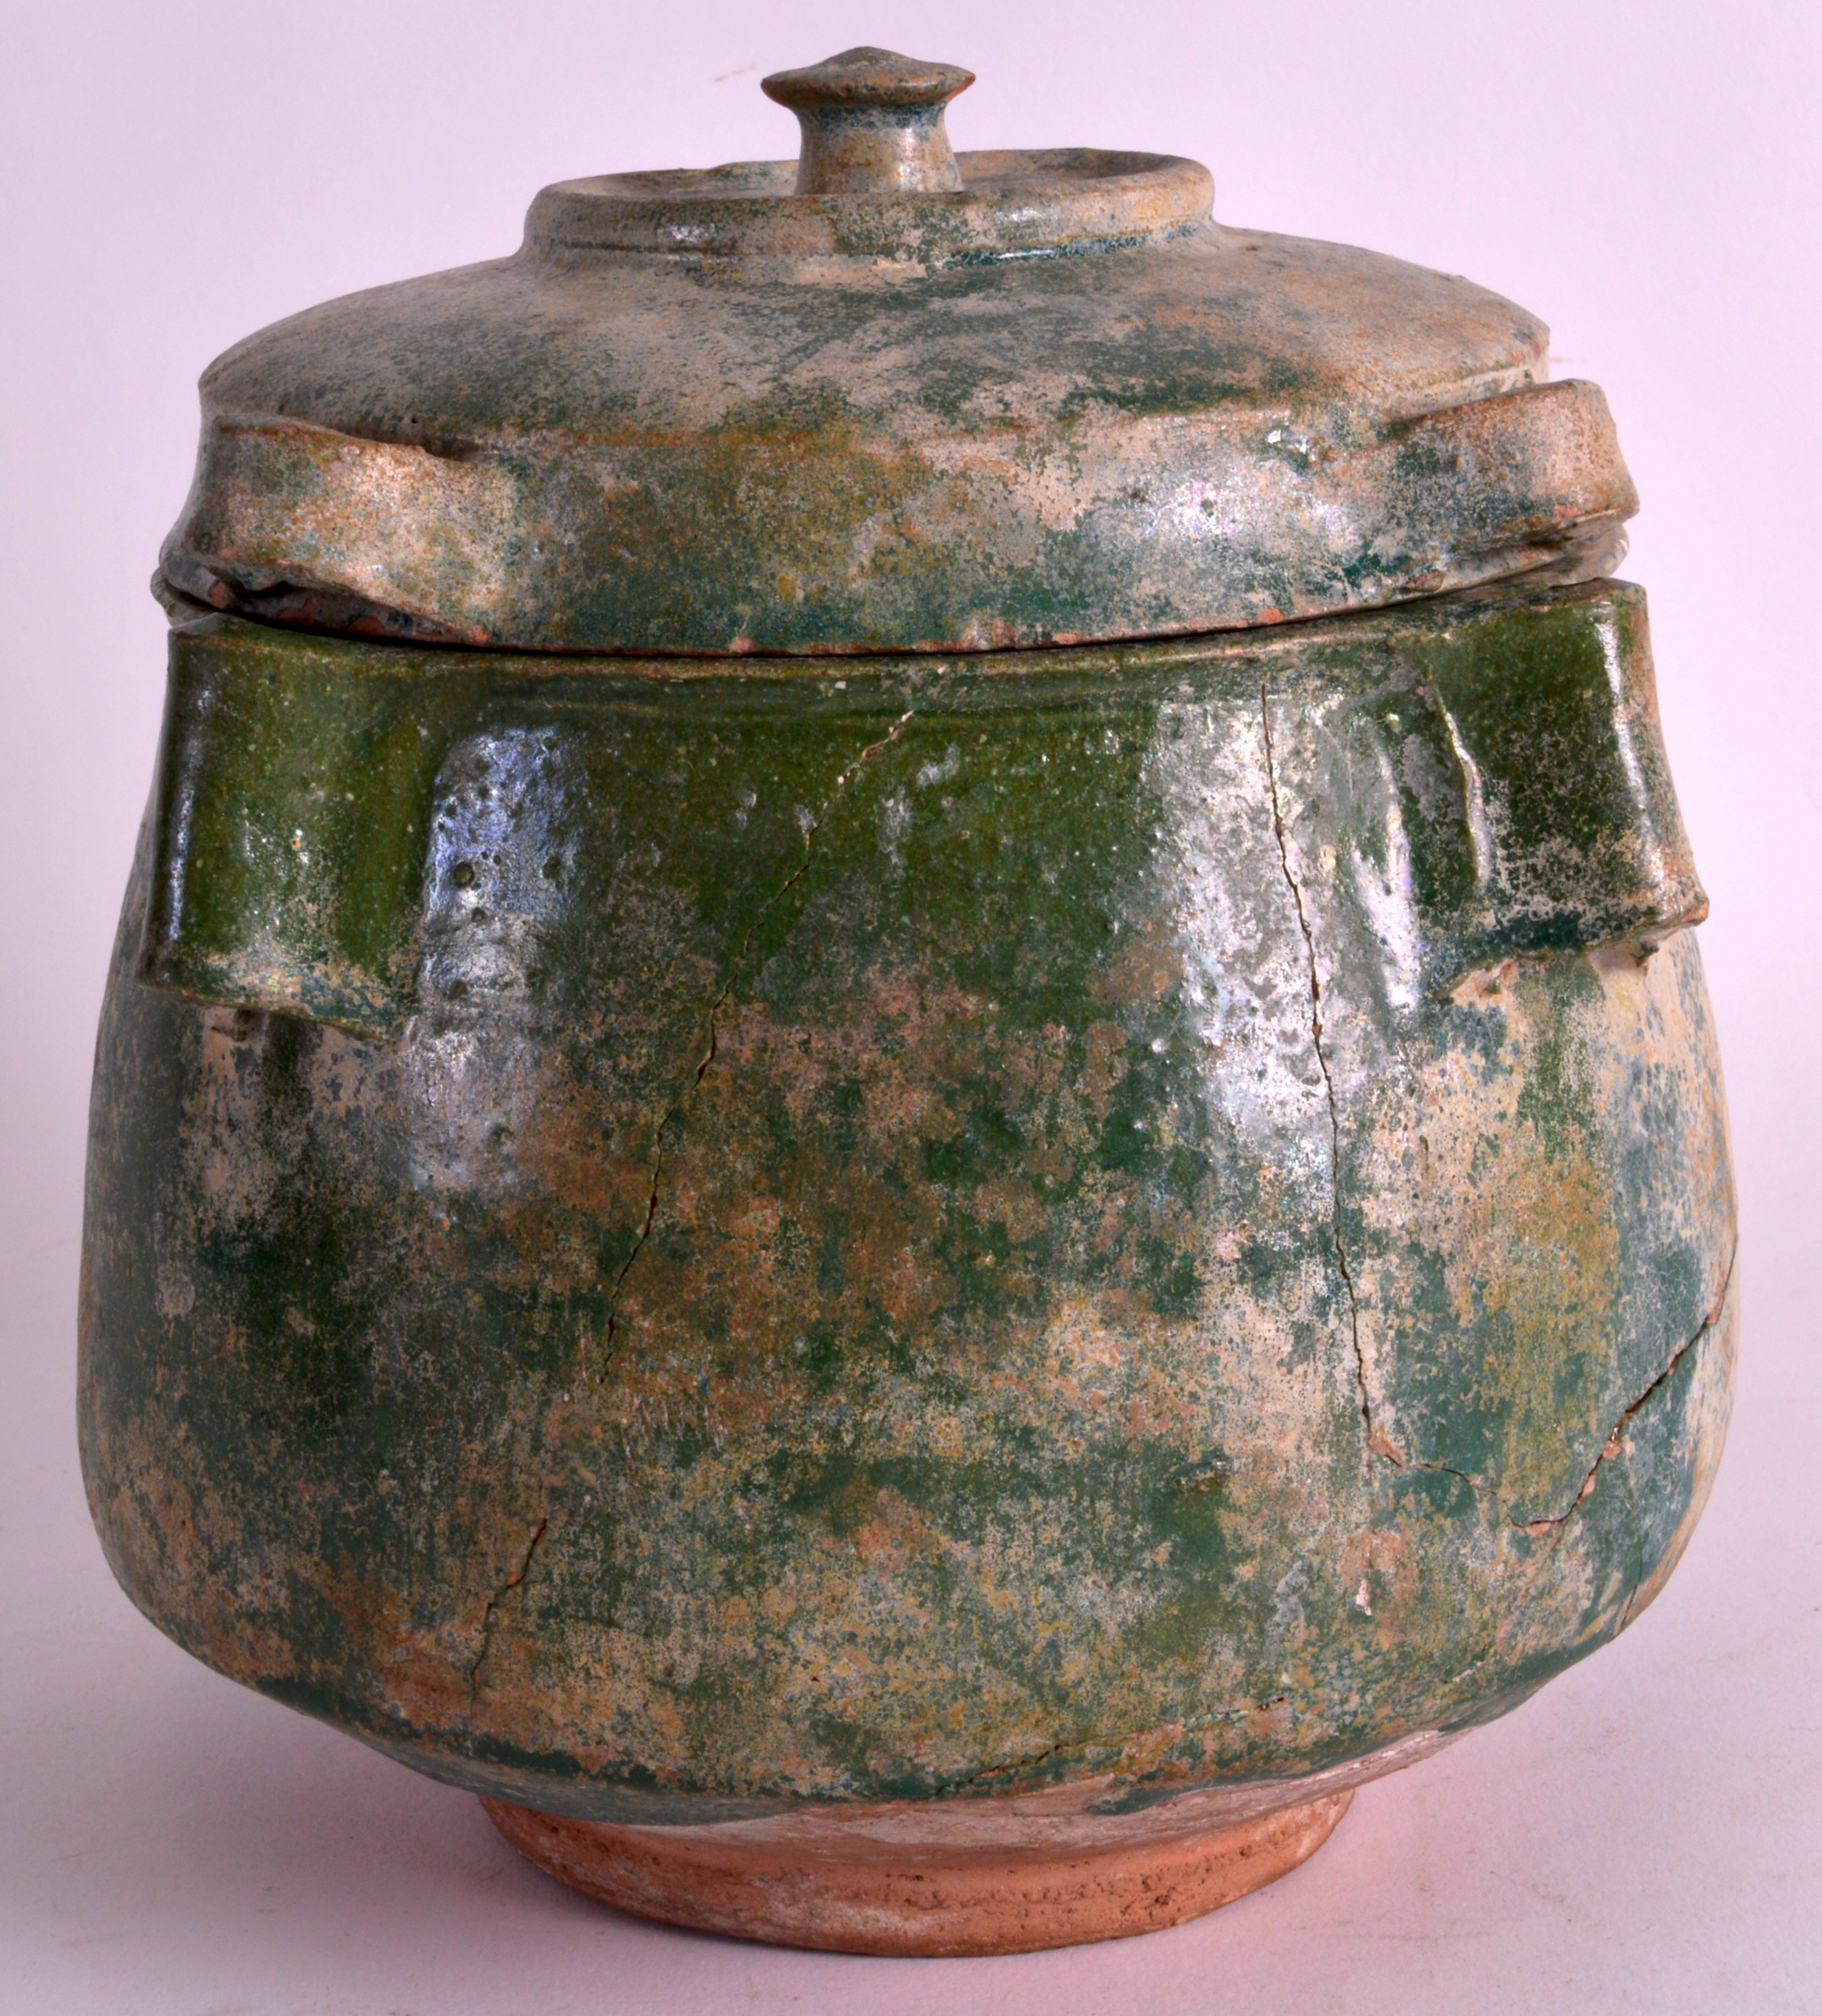 A 10TH TO 12TH CENTURY PERSIAN GREEN GLAZED POT AND COVER with four angular supports. 7.5ins high.